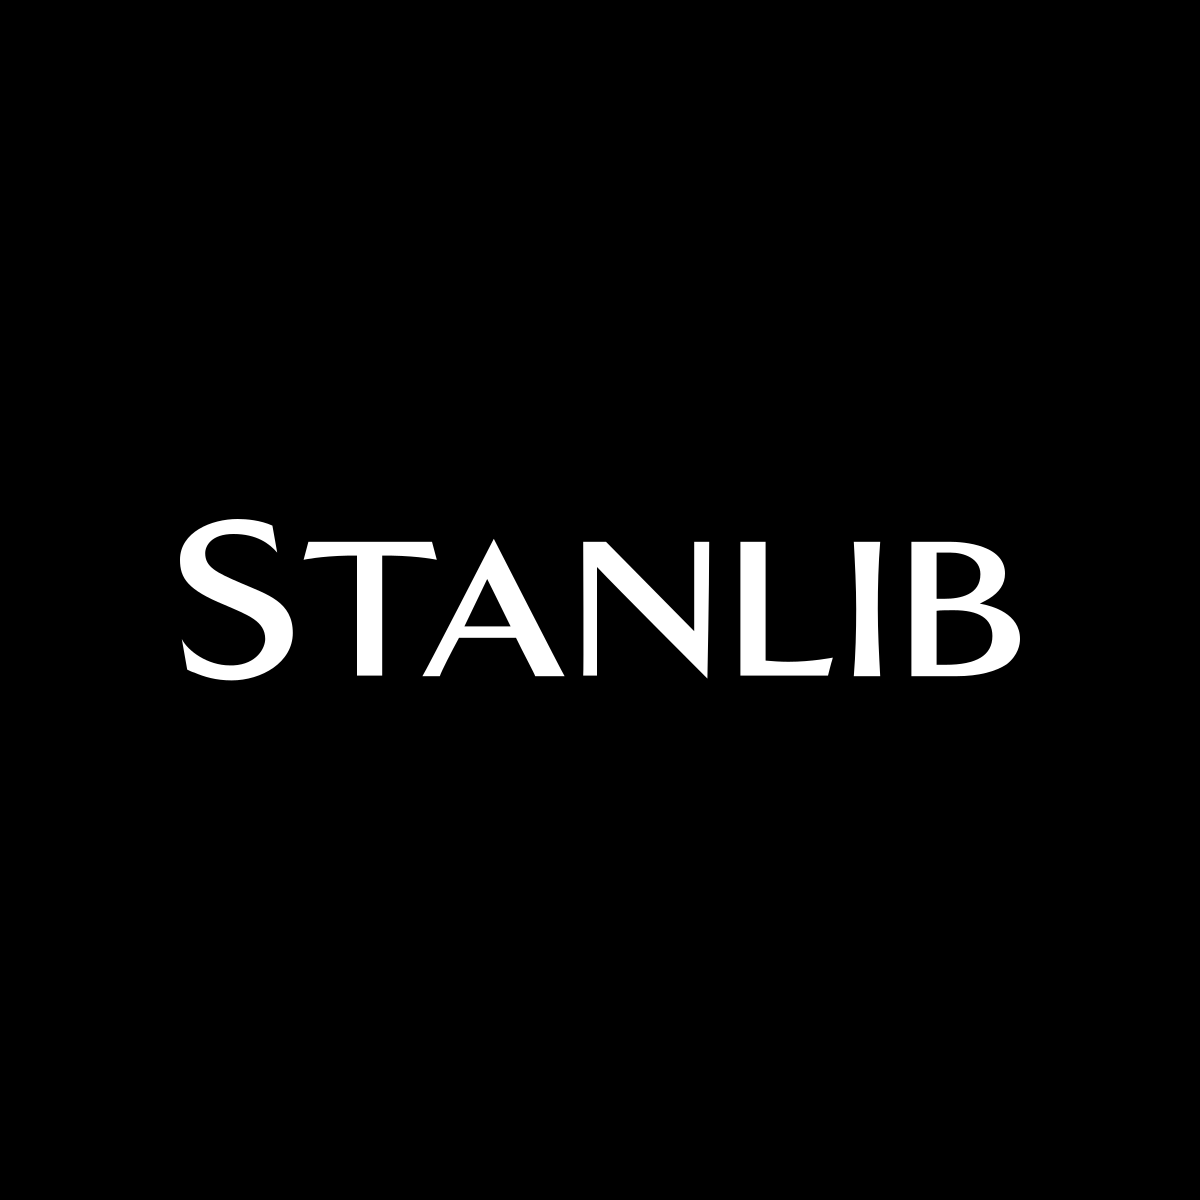 STANLIB delivers robust performance; on track to embark on